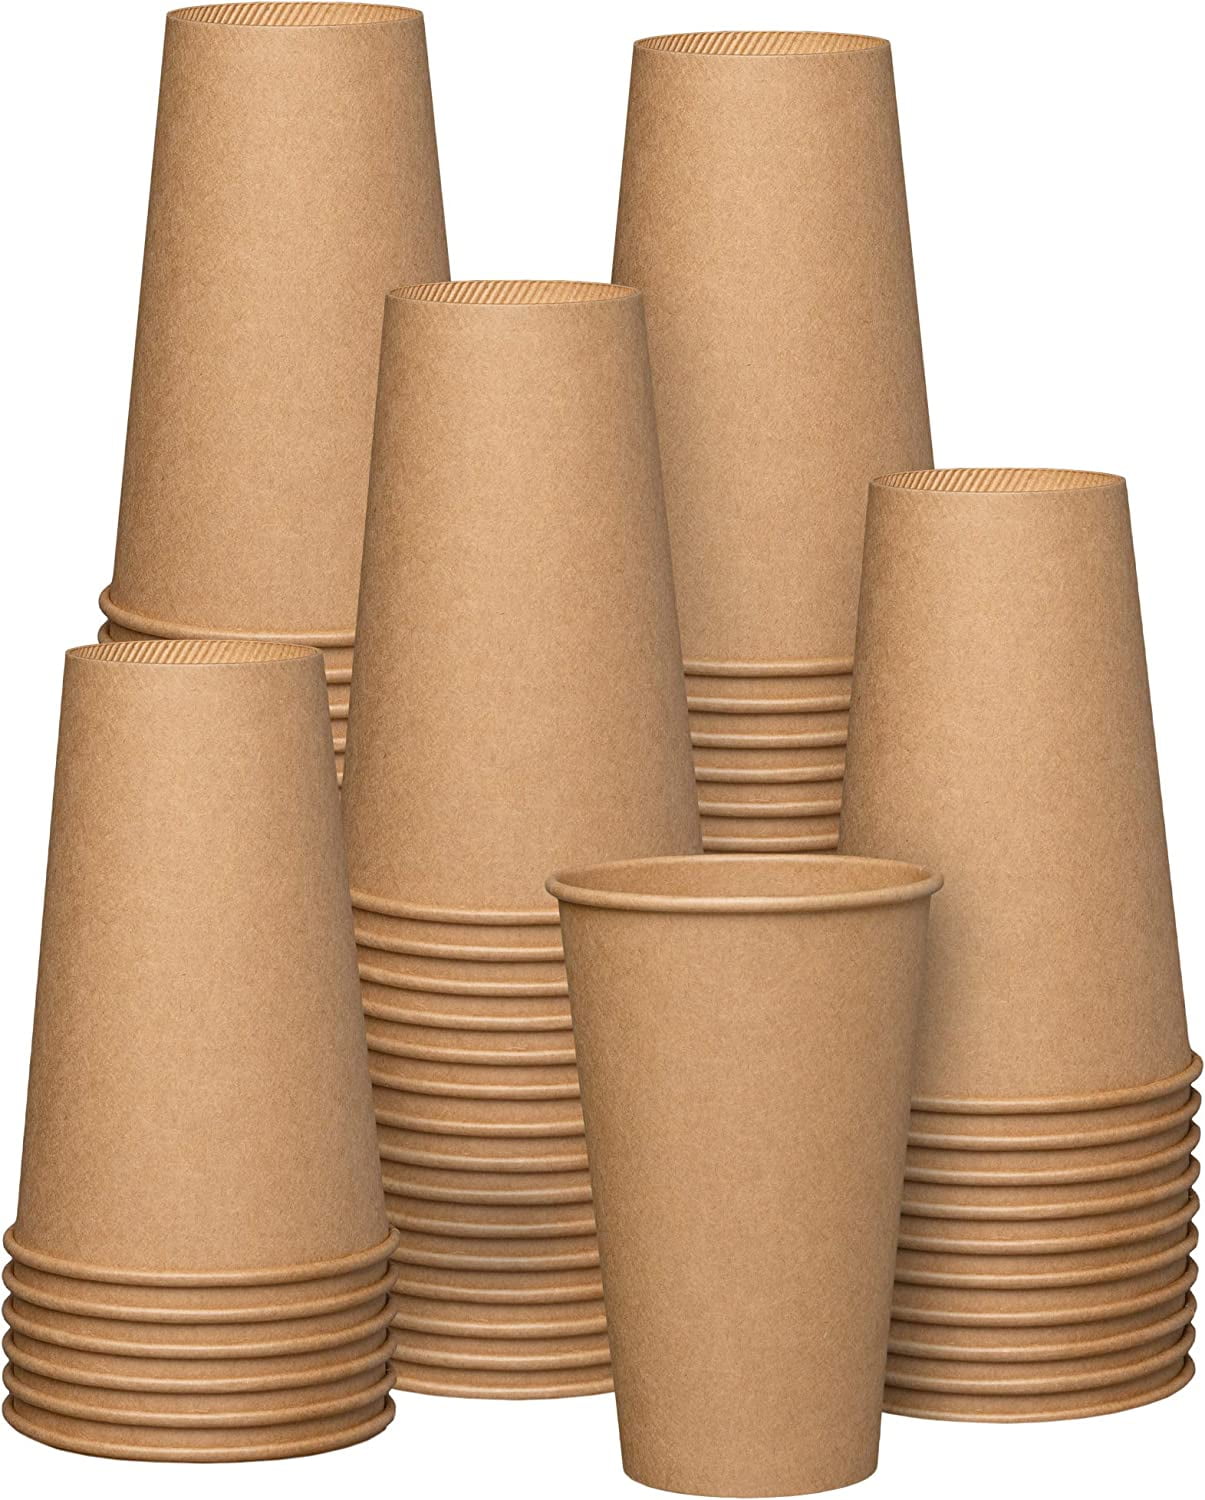 150 Pack] 12oz Classic Durable Disposable Paper Coffee Hot Cups For  Hot/Cold Drink, Coffee, Tea, Cocoa, Travel, Office, Home, Cider, Hot  Chocolate, To go, by EcoQuality (12 ounce) 